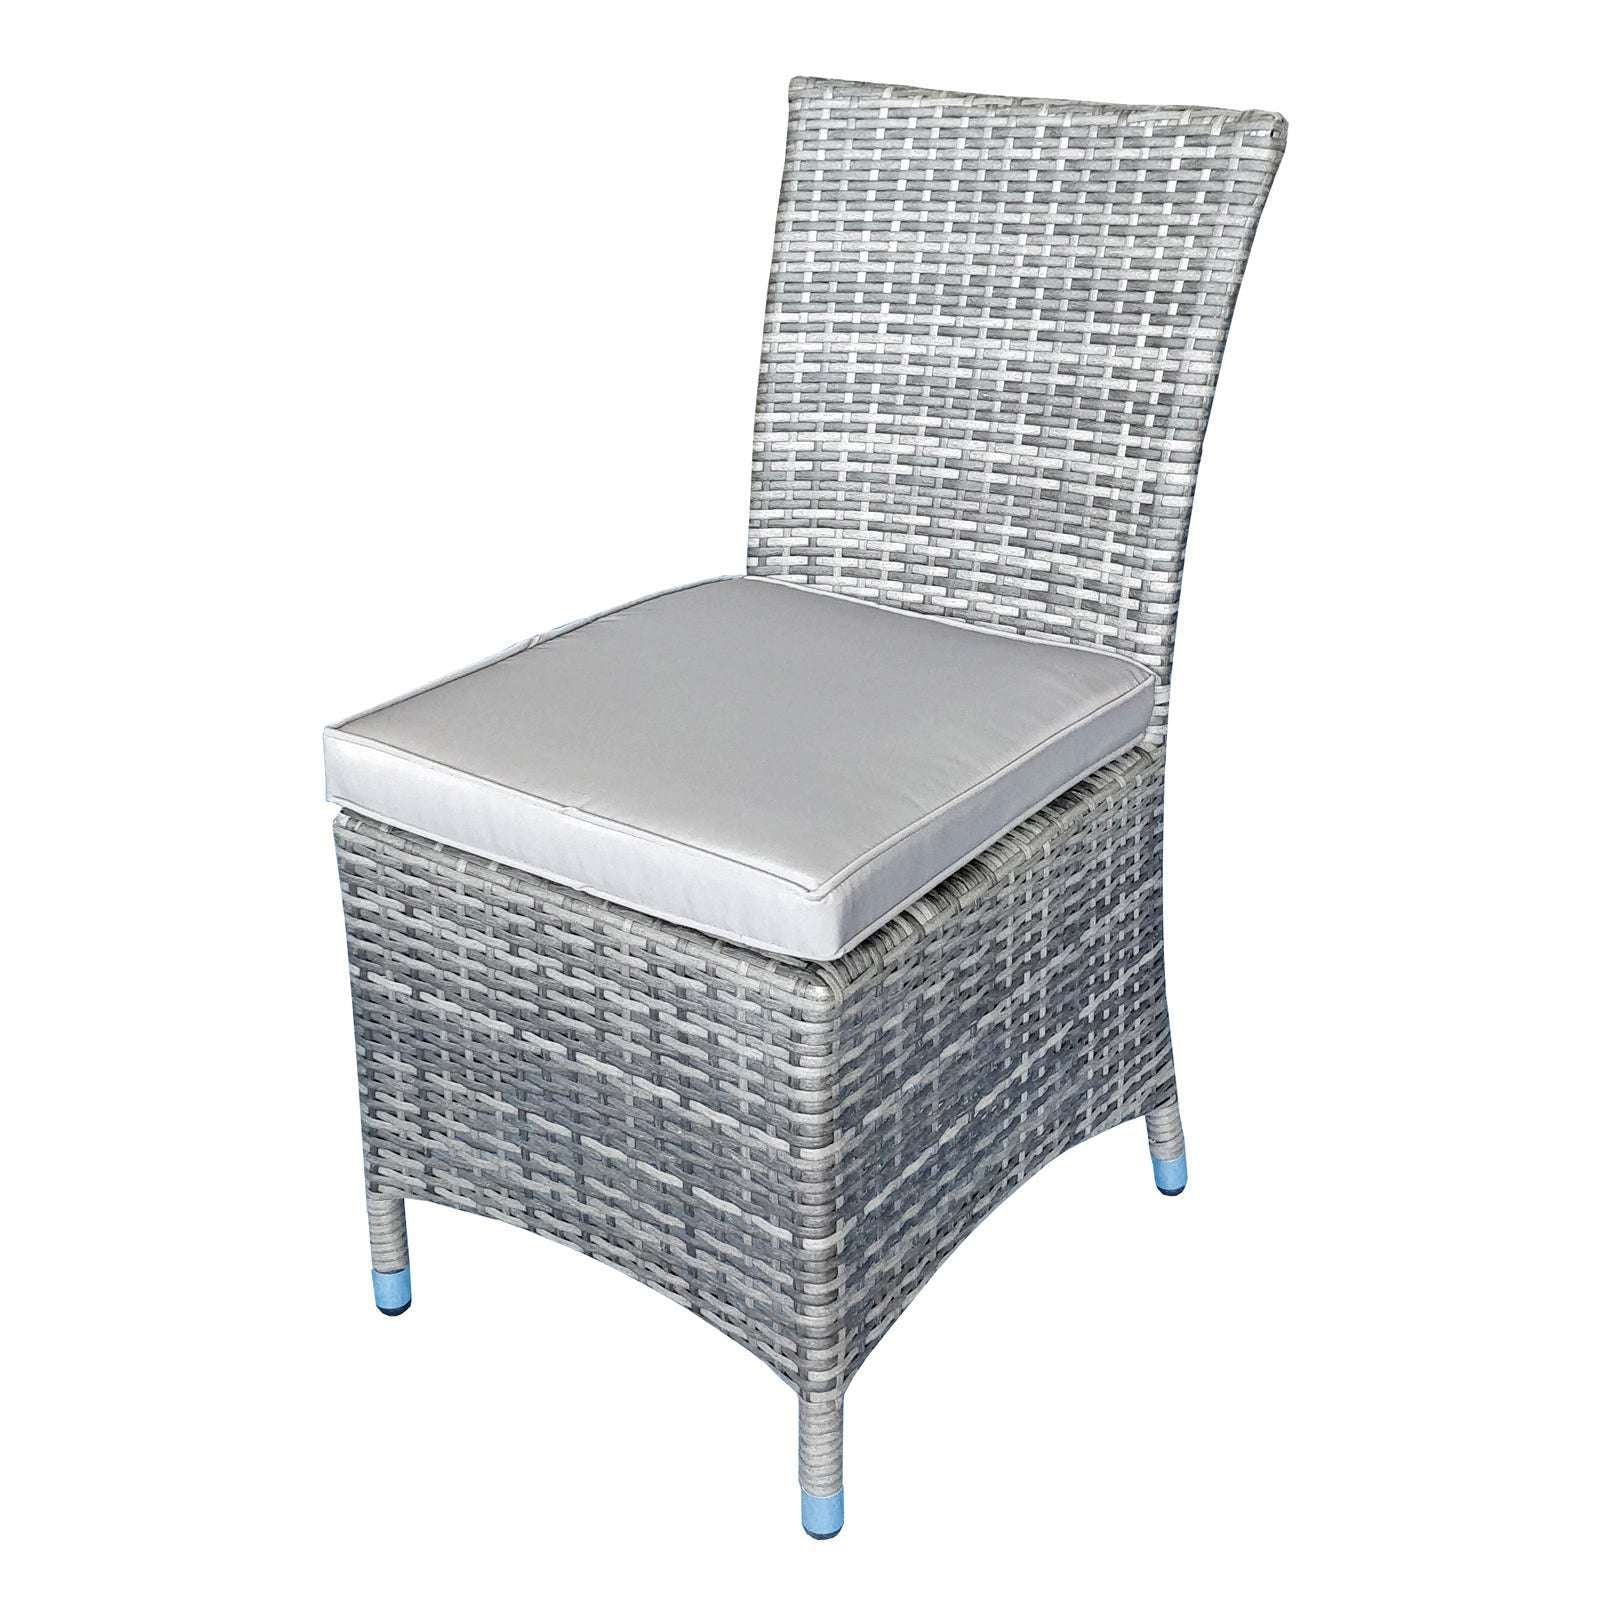 Exceptional Garden:Signature Weave Emily 2-Seater Bistro Set Armless Chairs